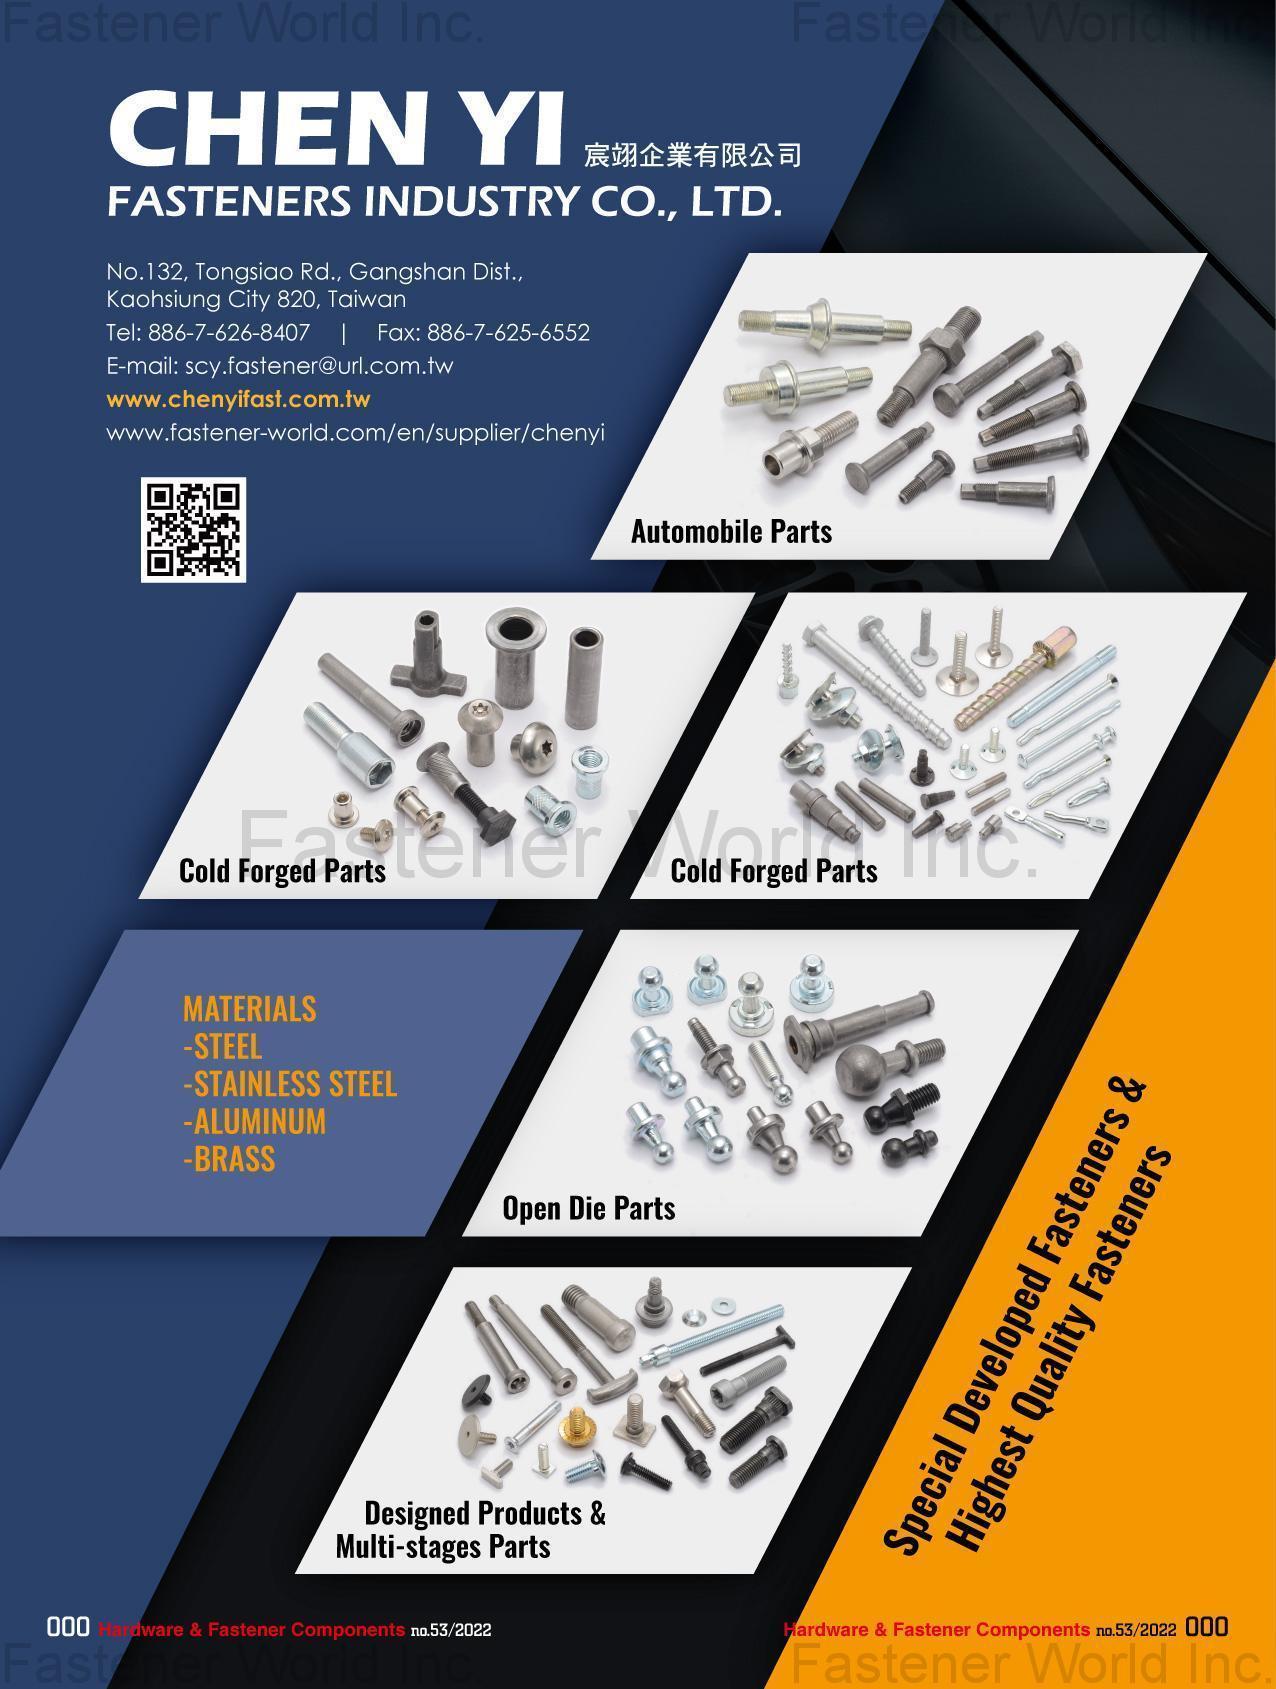 CHEN YI FASTENERS INDUSTRY CO., LTD. , Automobile Parts, Cold Forged Parts, Open Die Parts, Designed Products & Multi-stages Parts